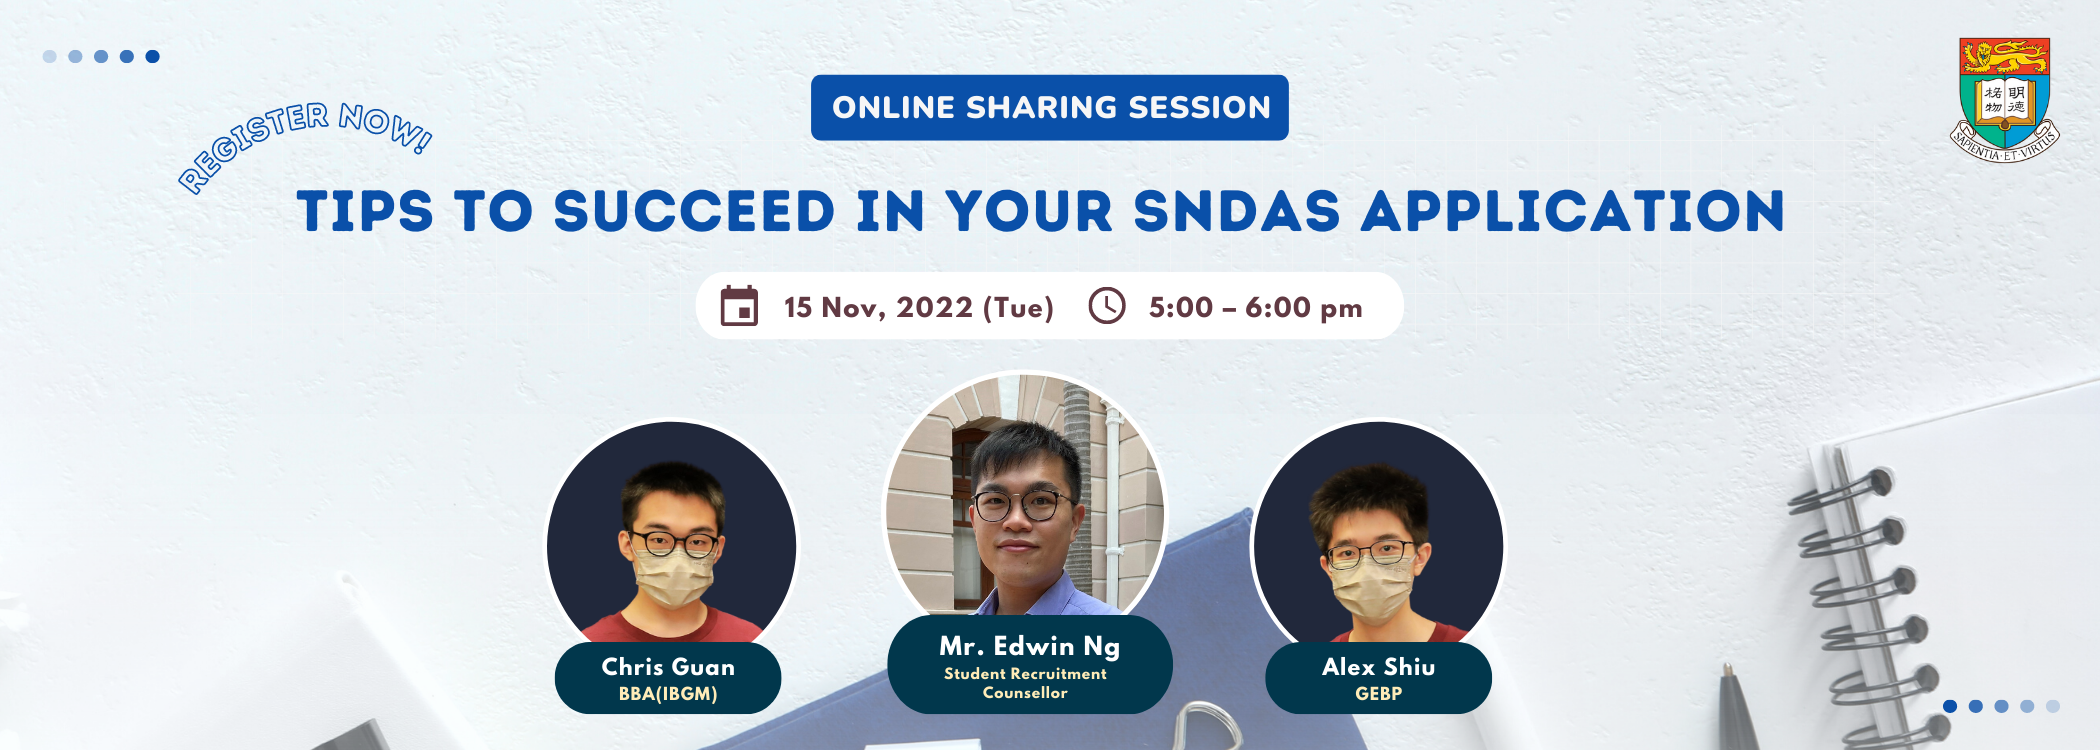 "Tips to Succeed in your SNDAS Application" 海報